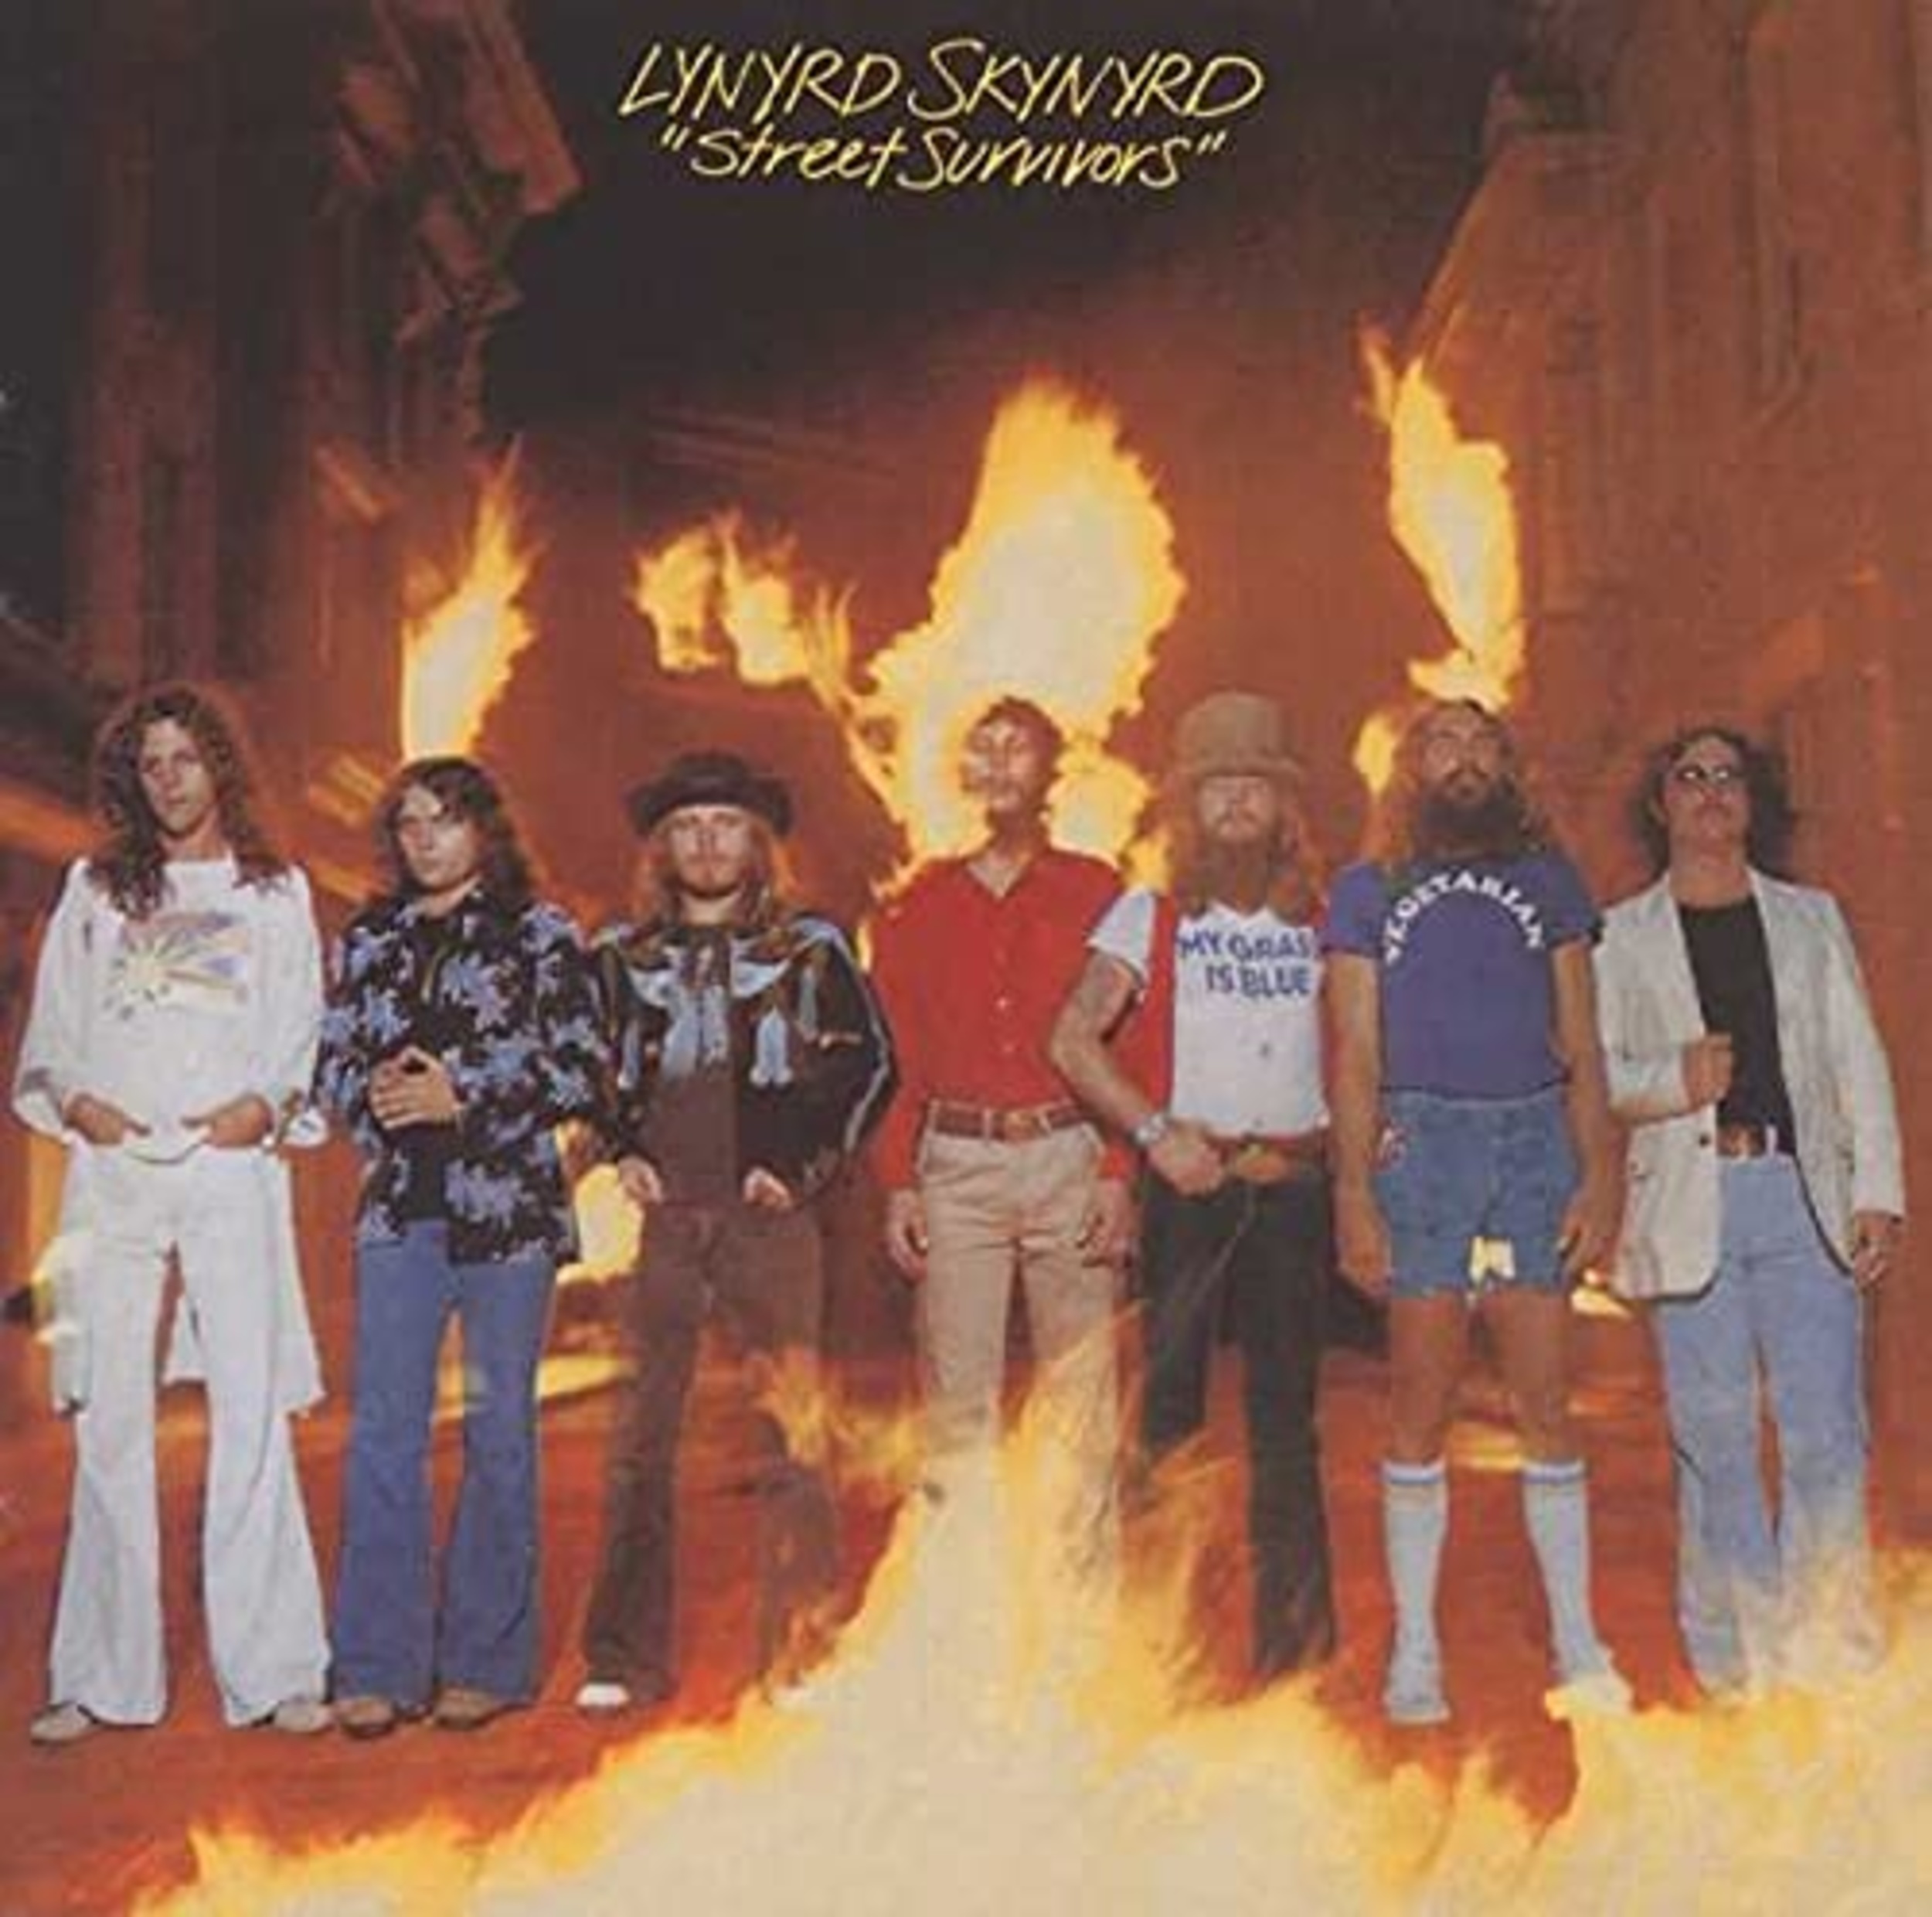 <p>Guitarist <a href="https://www.rocksoffmag.com/steve-gaines-southern-rocks-magic-man/">Steve Gaines</a>' time in Lynyrd Skynyrd was brief (joining in 1975) but left quite a mark on the band's legacy. Gaines' only studio album appearance with Skynyrd came on 1977's <em>Street </em><em>Survivors</em>, released three days before the plane crash. "<a href="https://www.youtube.com/watch?v=y2HRrjpiM7Y">I Know a Little</a>" was his most significant contribution to the album. Gaines wrote the track, which showcased his tremendous guitar-playing ability and what could have been going forward for the talented, young musician and the band.</p><p><a href='https://www.msn.com/en-us/community/channel/vid-cj9pqbr0vn9in2b6ddcd8sfgpfq6x6utp44fssrv6mc2gtybw0us'>Follow us on MSN to see more of our exclusive entertainment content.</a></p>